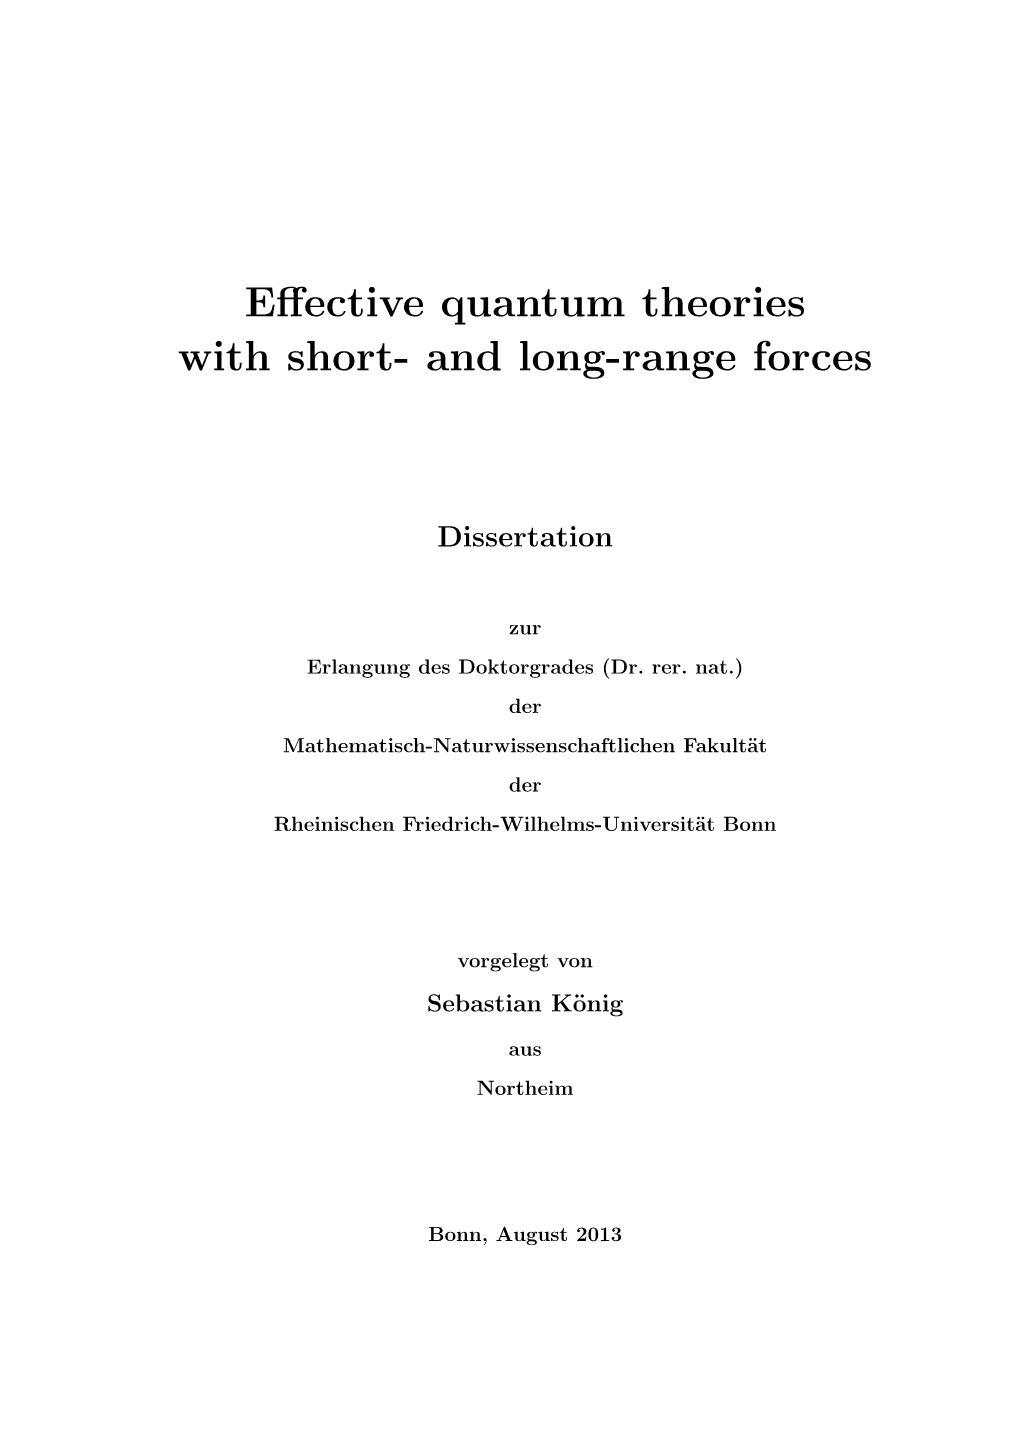 Effective Quantum Theories with Short- and Long-Range Forces